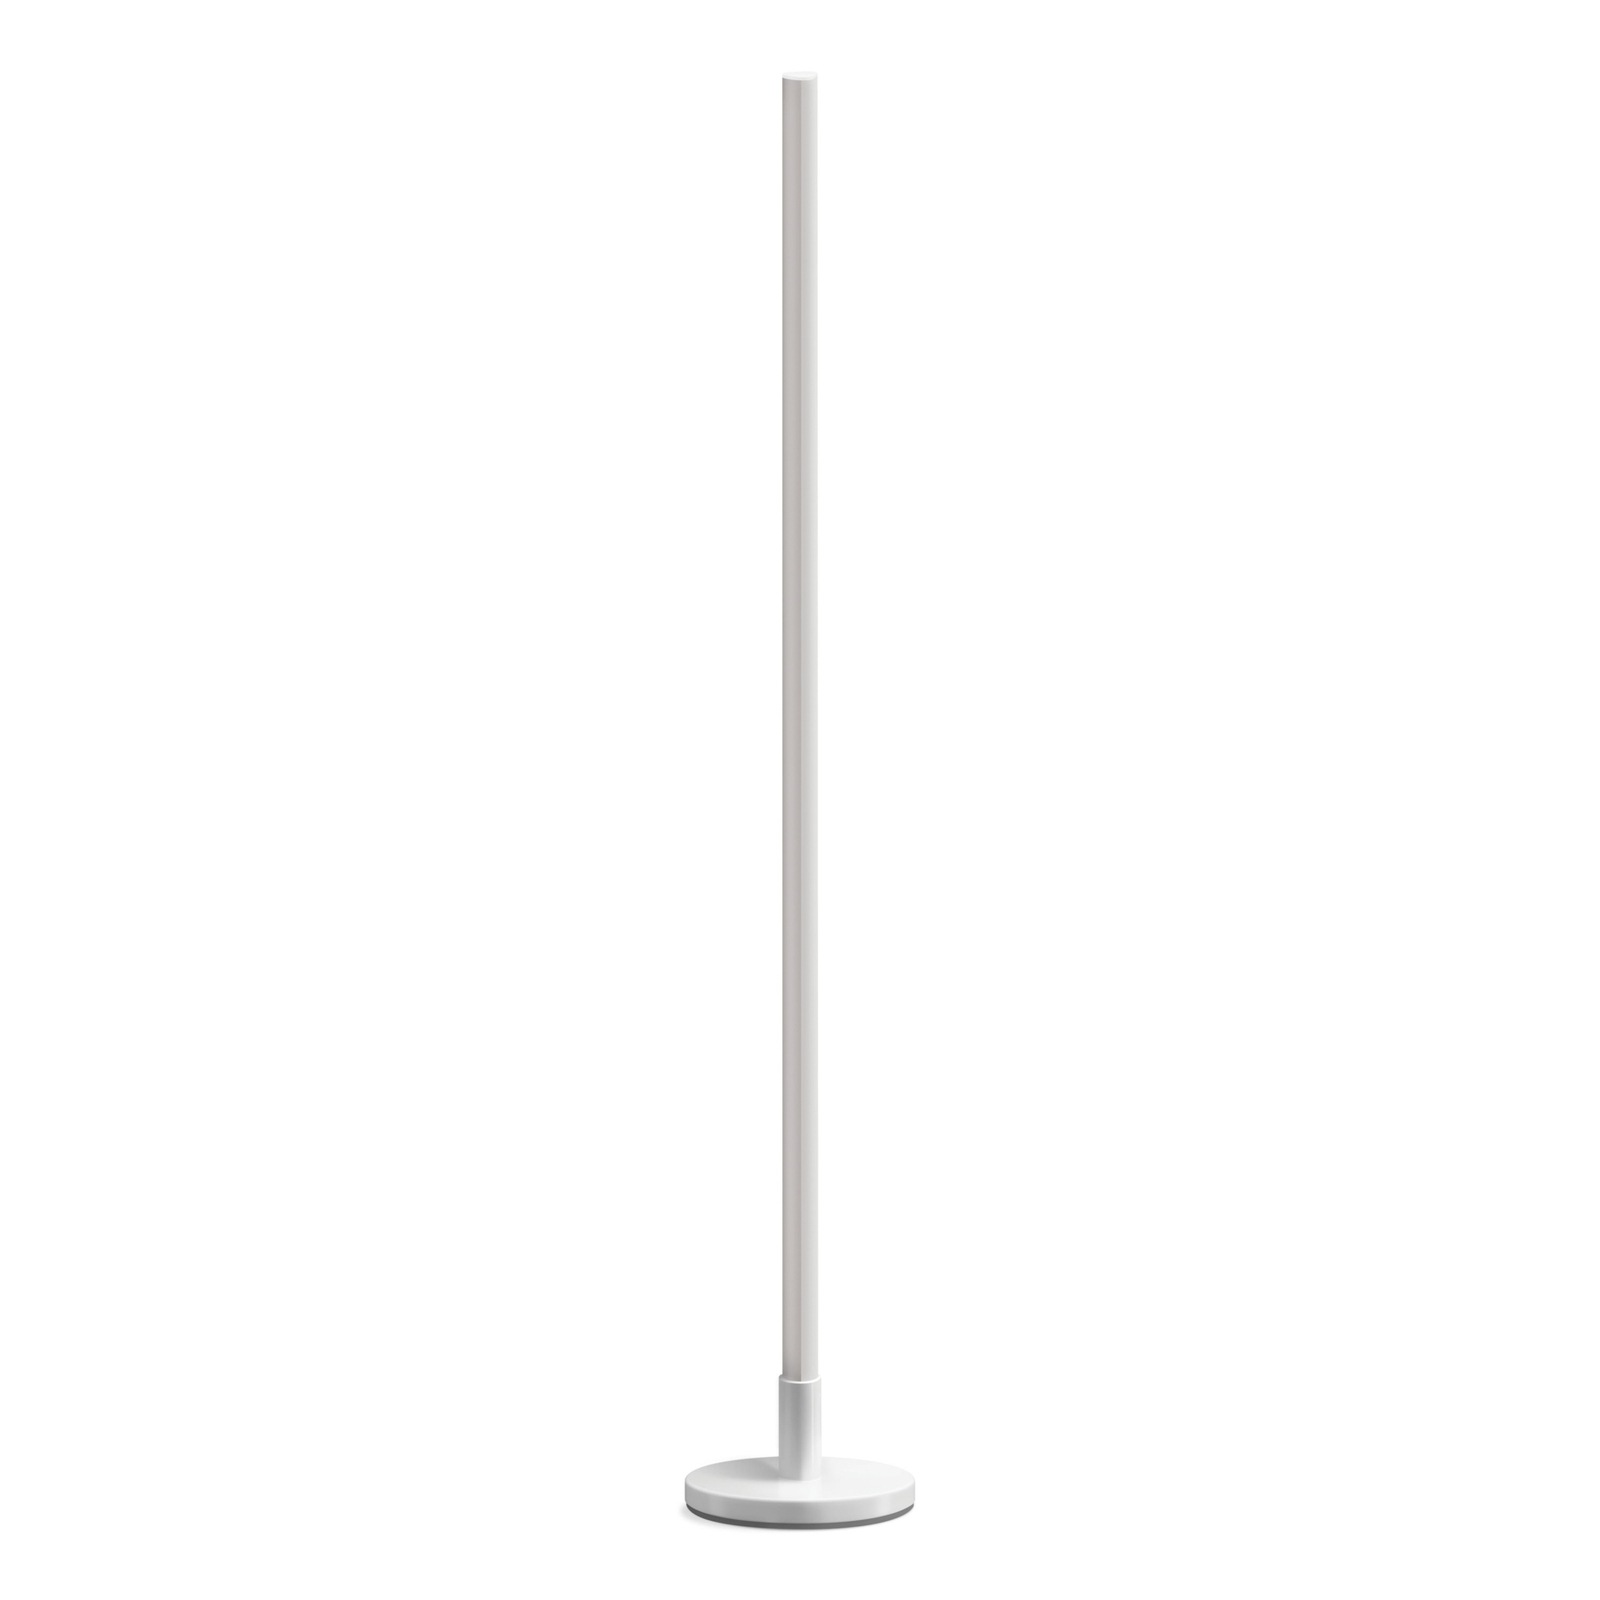 WiZ lampe sur pied LED Pole, Tunable White and Color